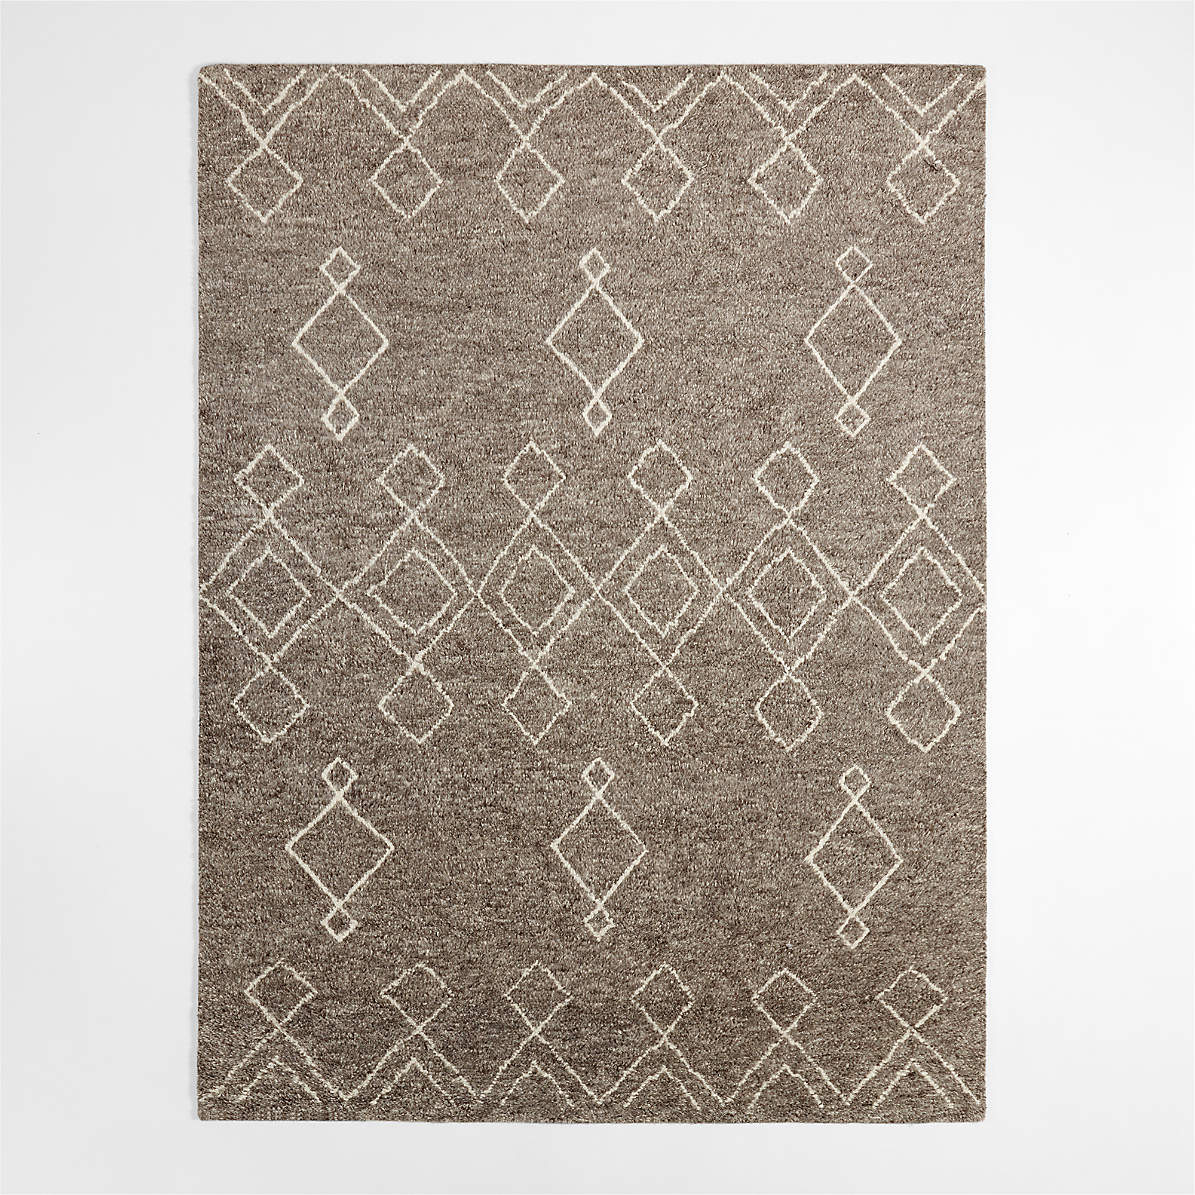 Provence Jute and Wool Hand-Knotted Taupe Brown Area Rug 6'x9